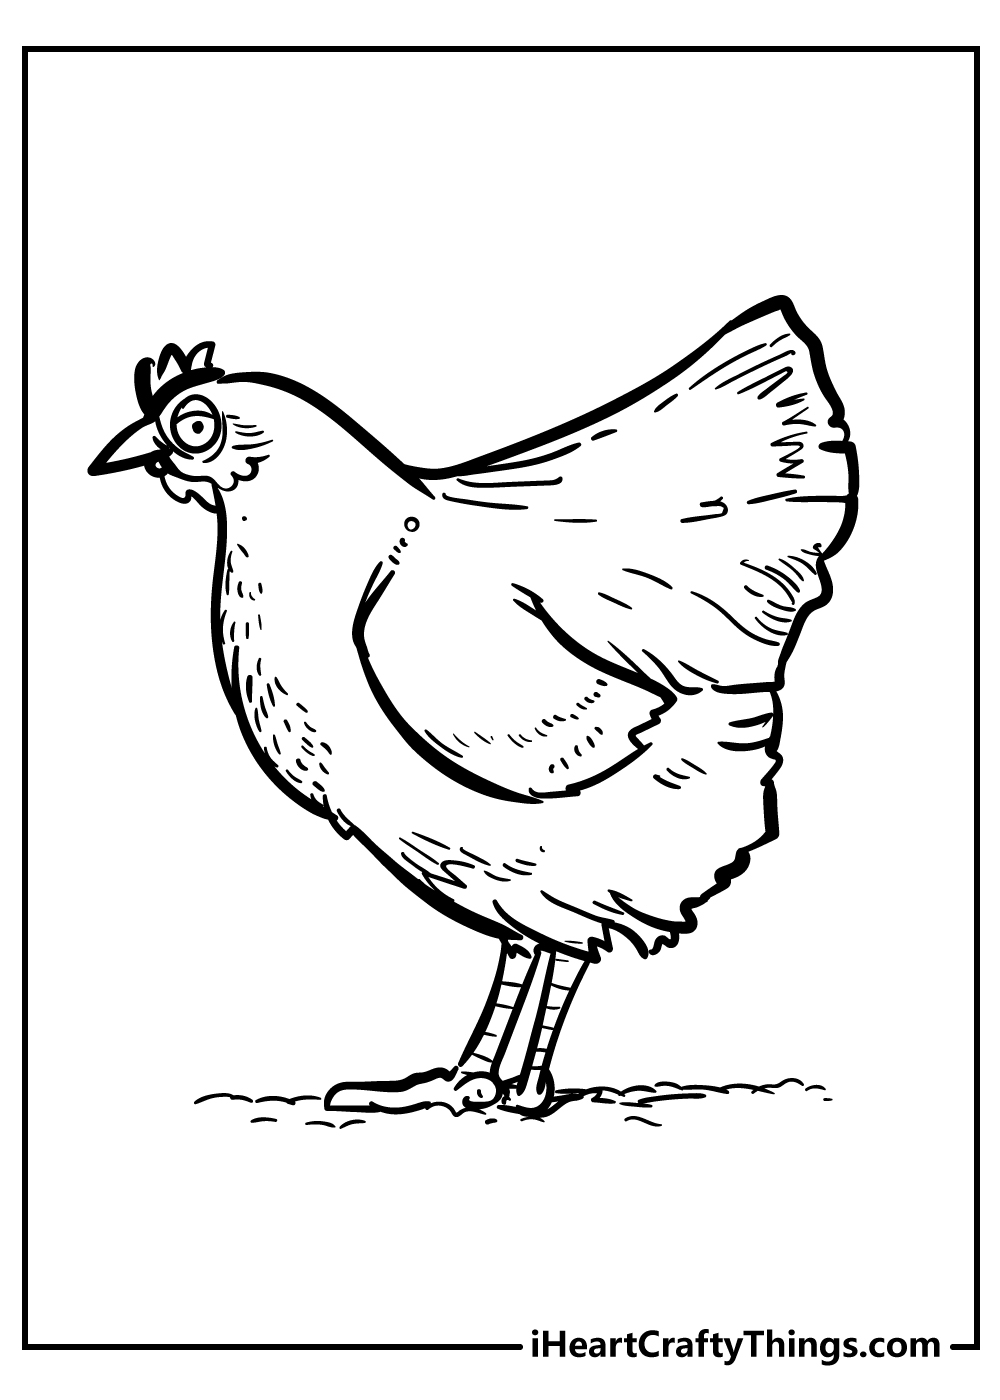 Chicken Coloring Pages free pdf download